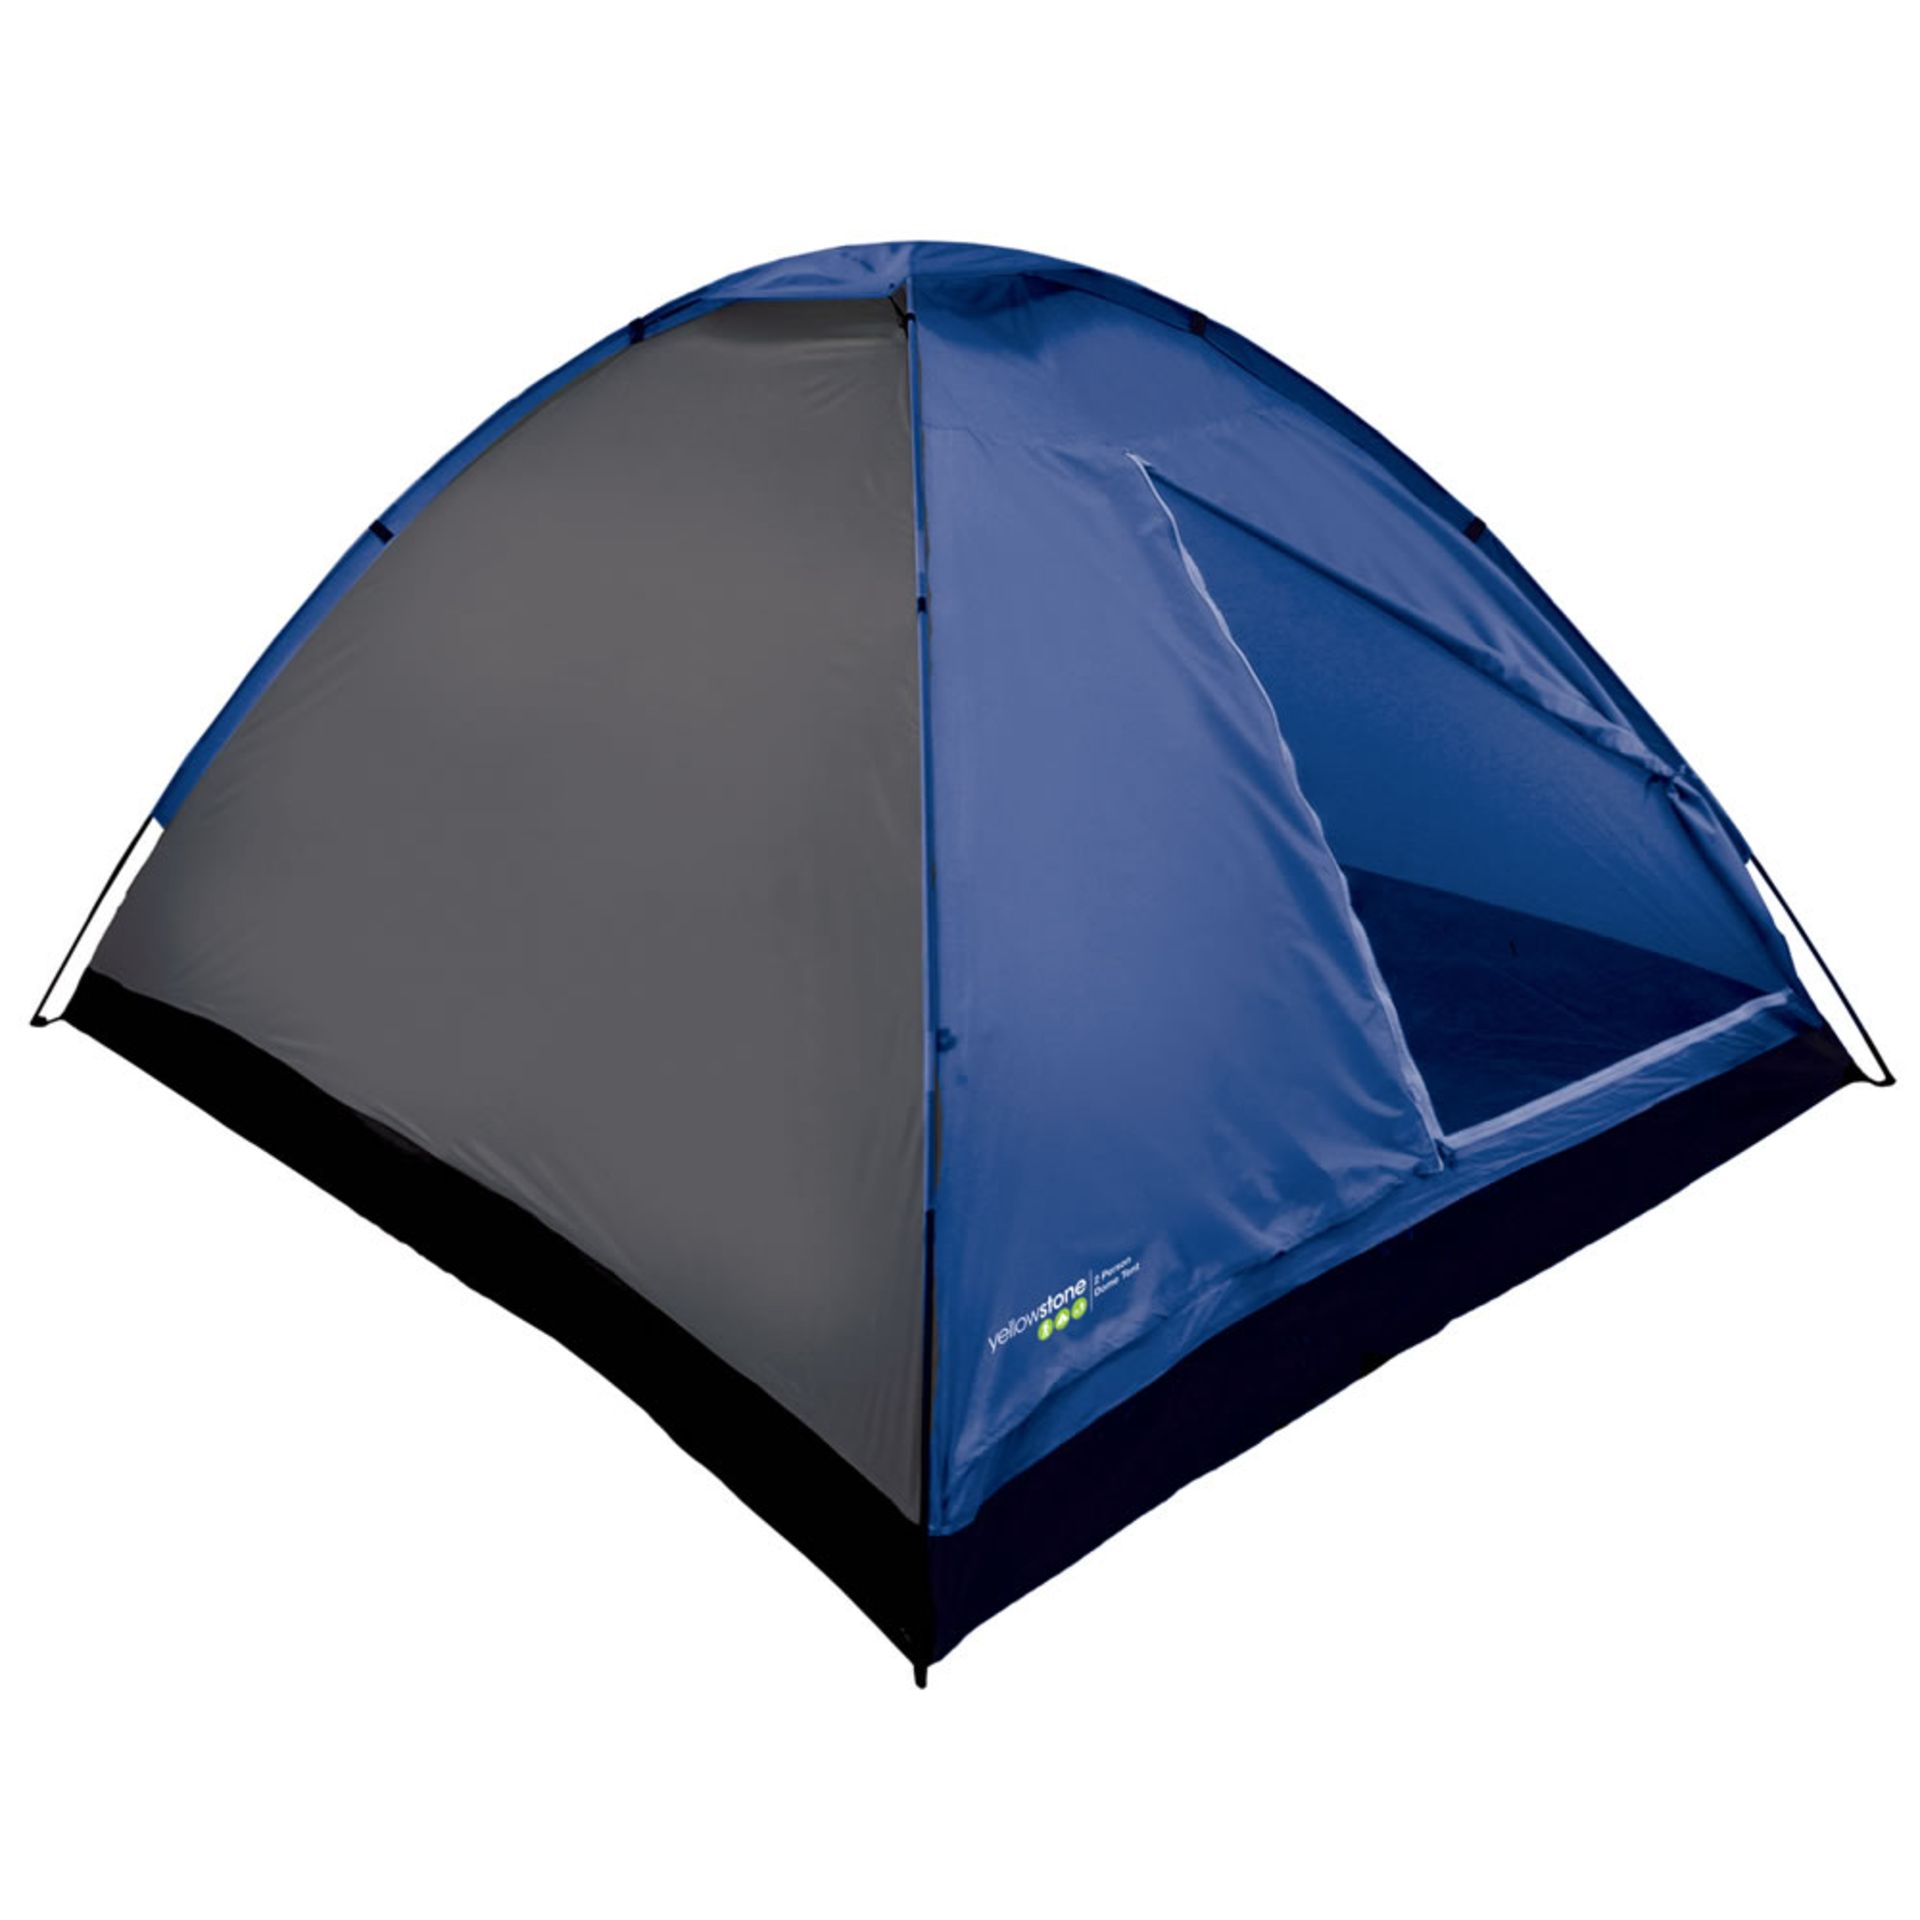 V Two Person Dome Tent X 10  Bid price to be multiplied by Ten - Image 2 of 2